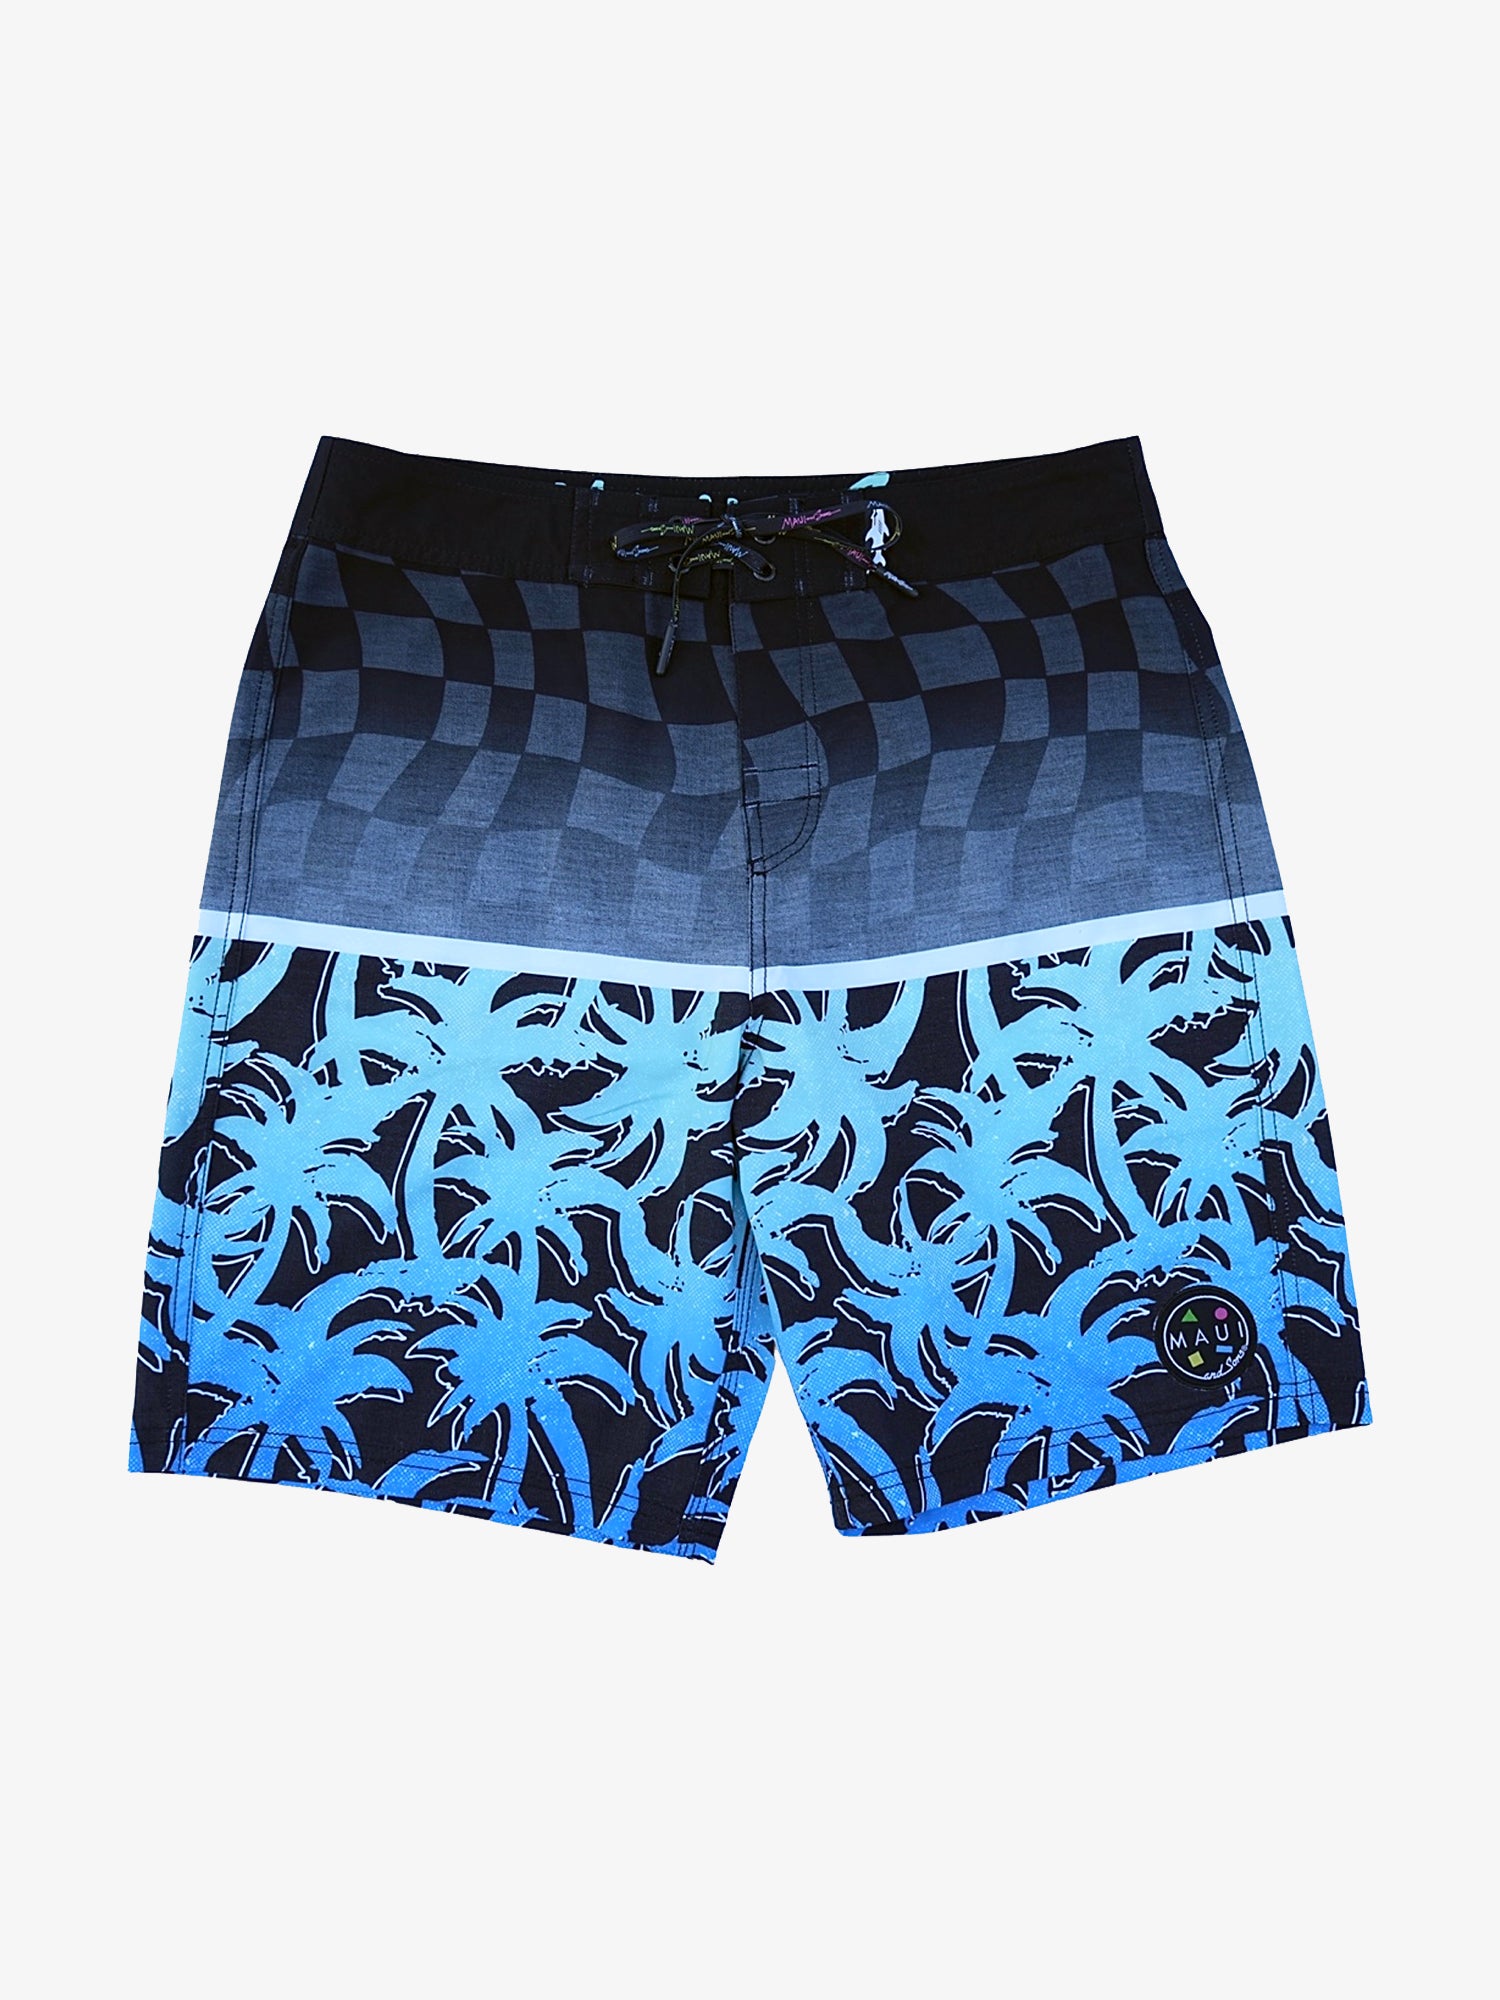 Best Maui Rippers Board Shorts Size 24 for sale in Tacoma